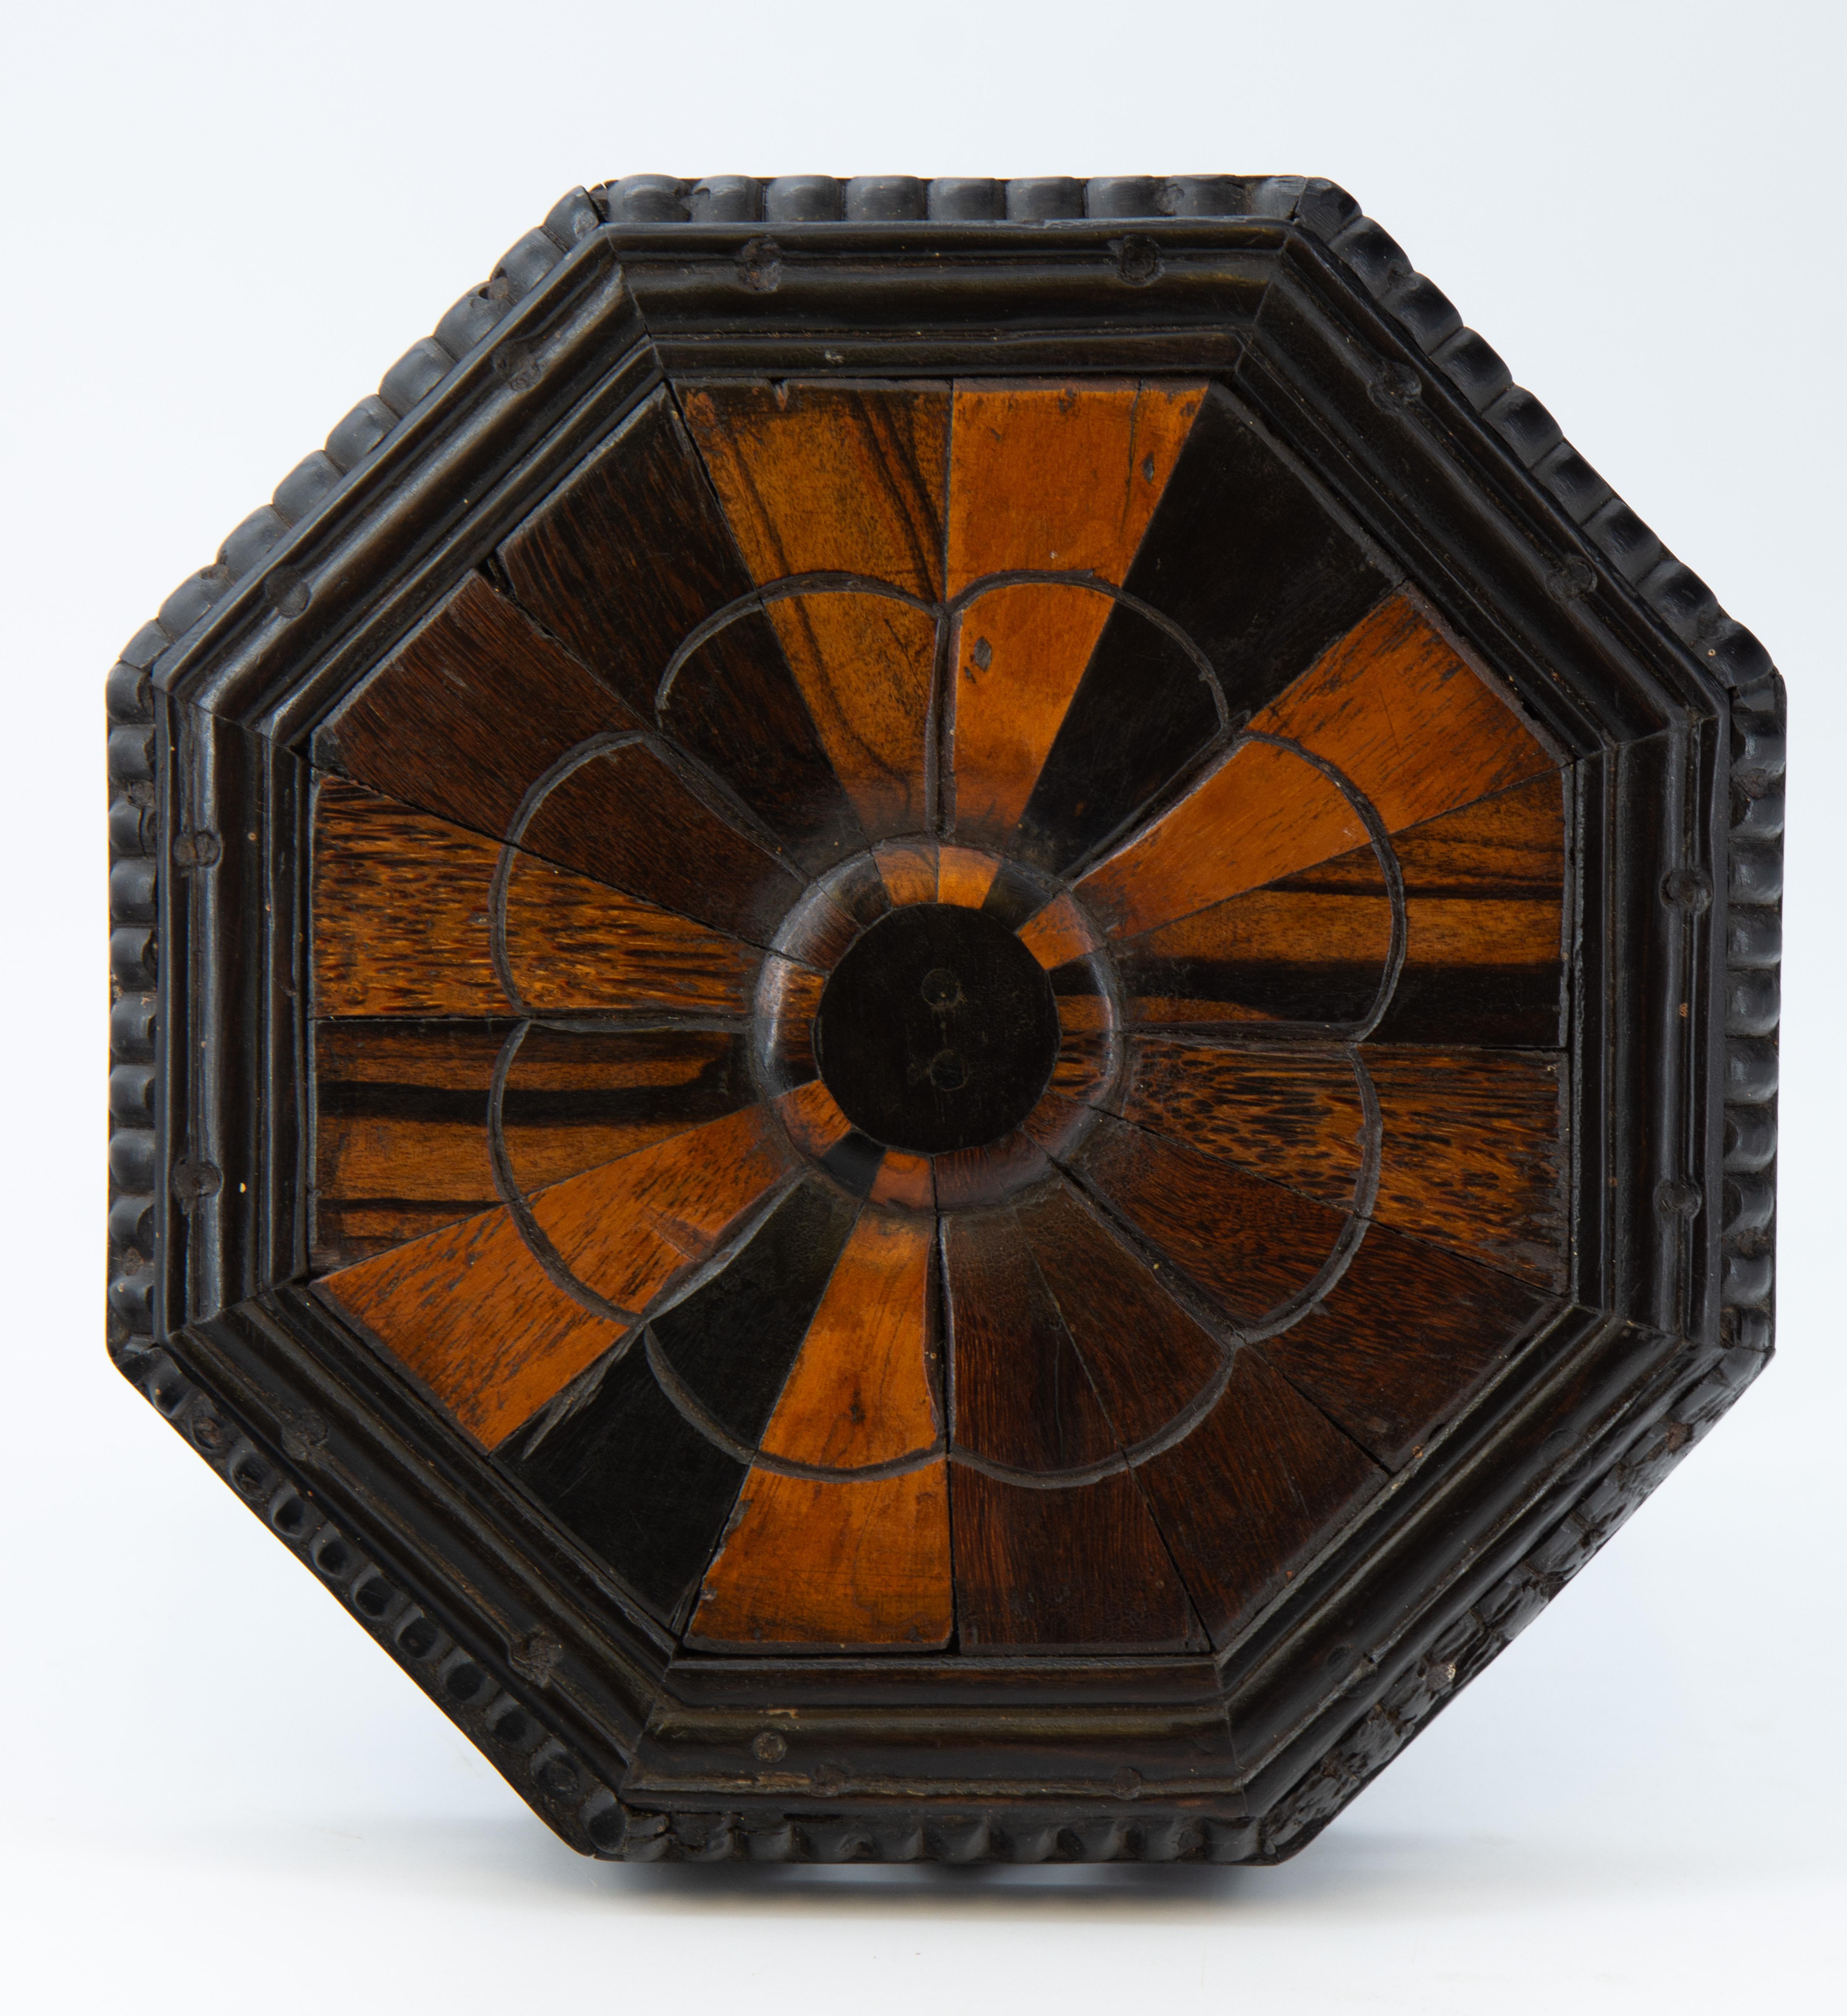 A rare antique ebony and specimen wood miniature octagonal table. Ceylonese/Indian. Circa 19th century.

Free UK delivery via a selected parcel company.

The top is radially veneered with exotic woods including Coromandel Ebony, Sal wood and